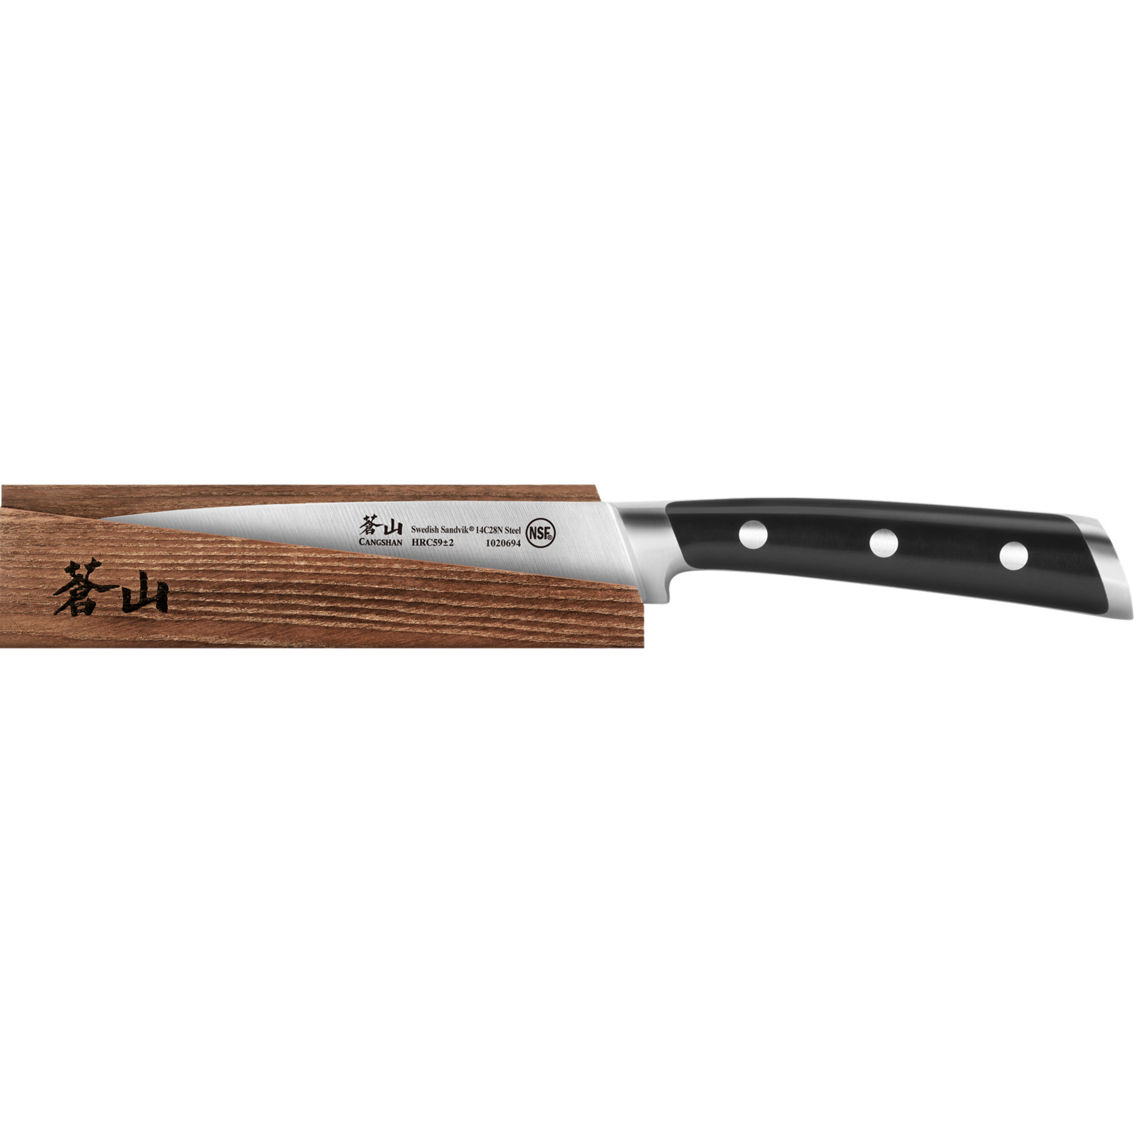 Cangshan Cutlery TS Series Forged 5 in. Utility Knife with Wood Sheath - Image 2 of 6